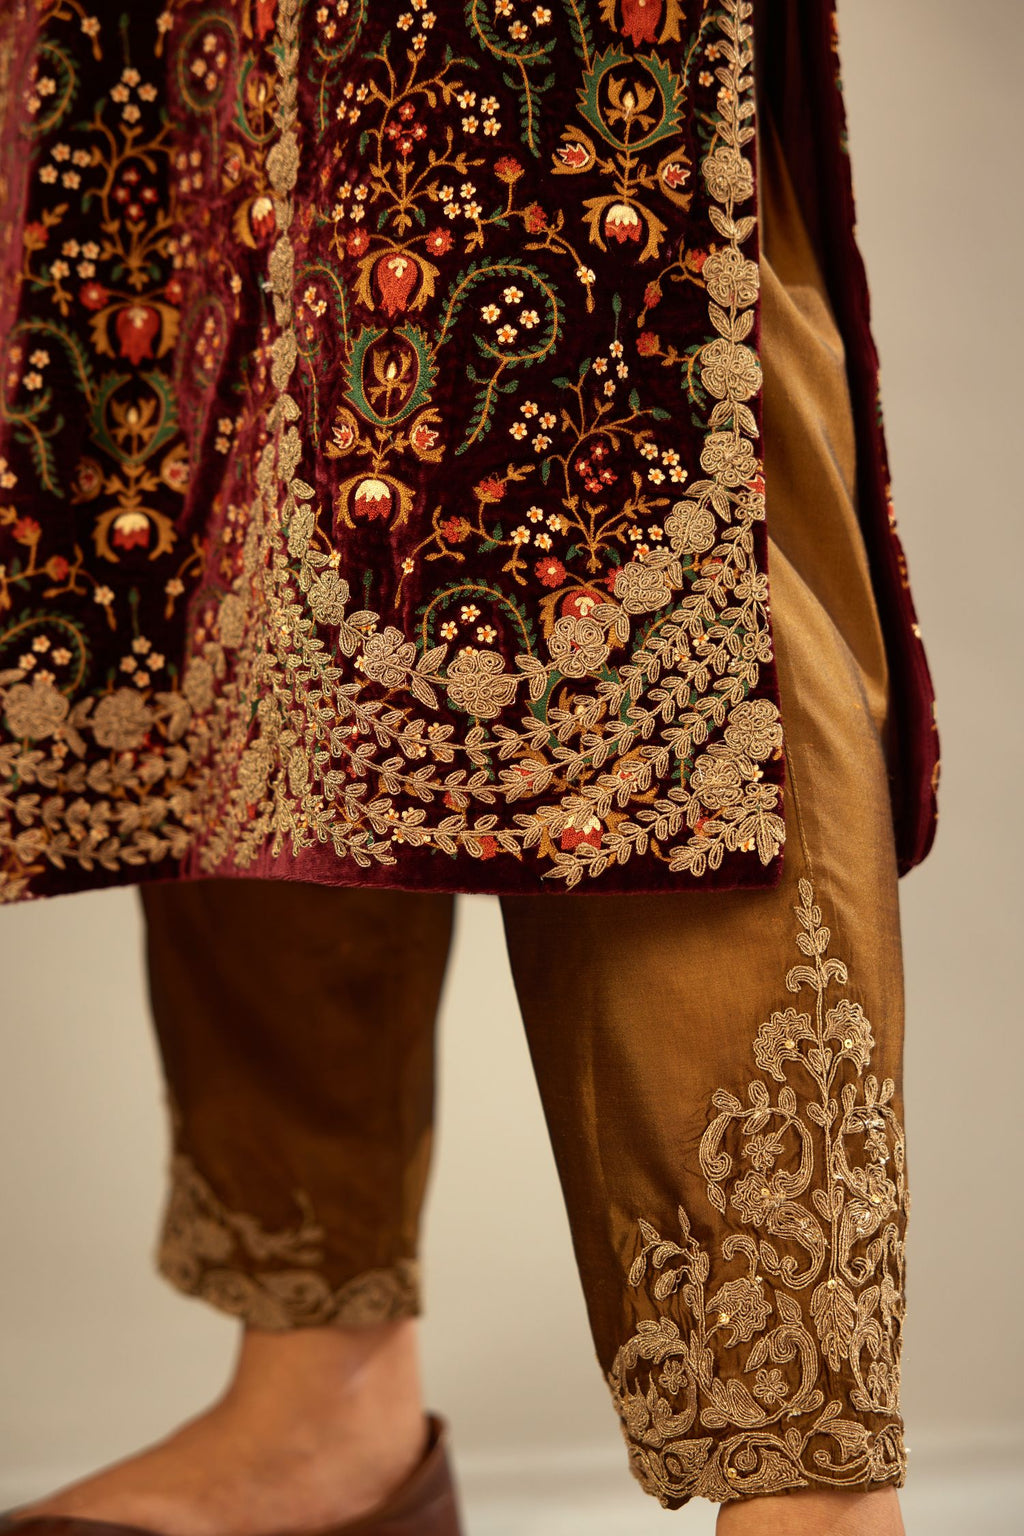 Maroon silk velvet lined kurta set with heavy jaal embroidery all over the kurta and ornamented with dori embroidery at neck, sleeves, side slits and hem.